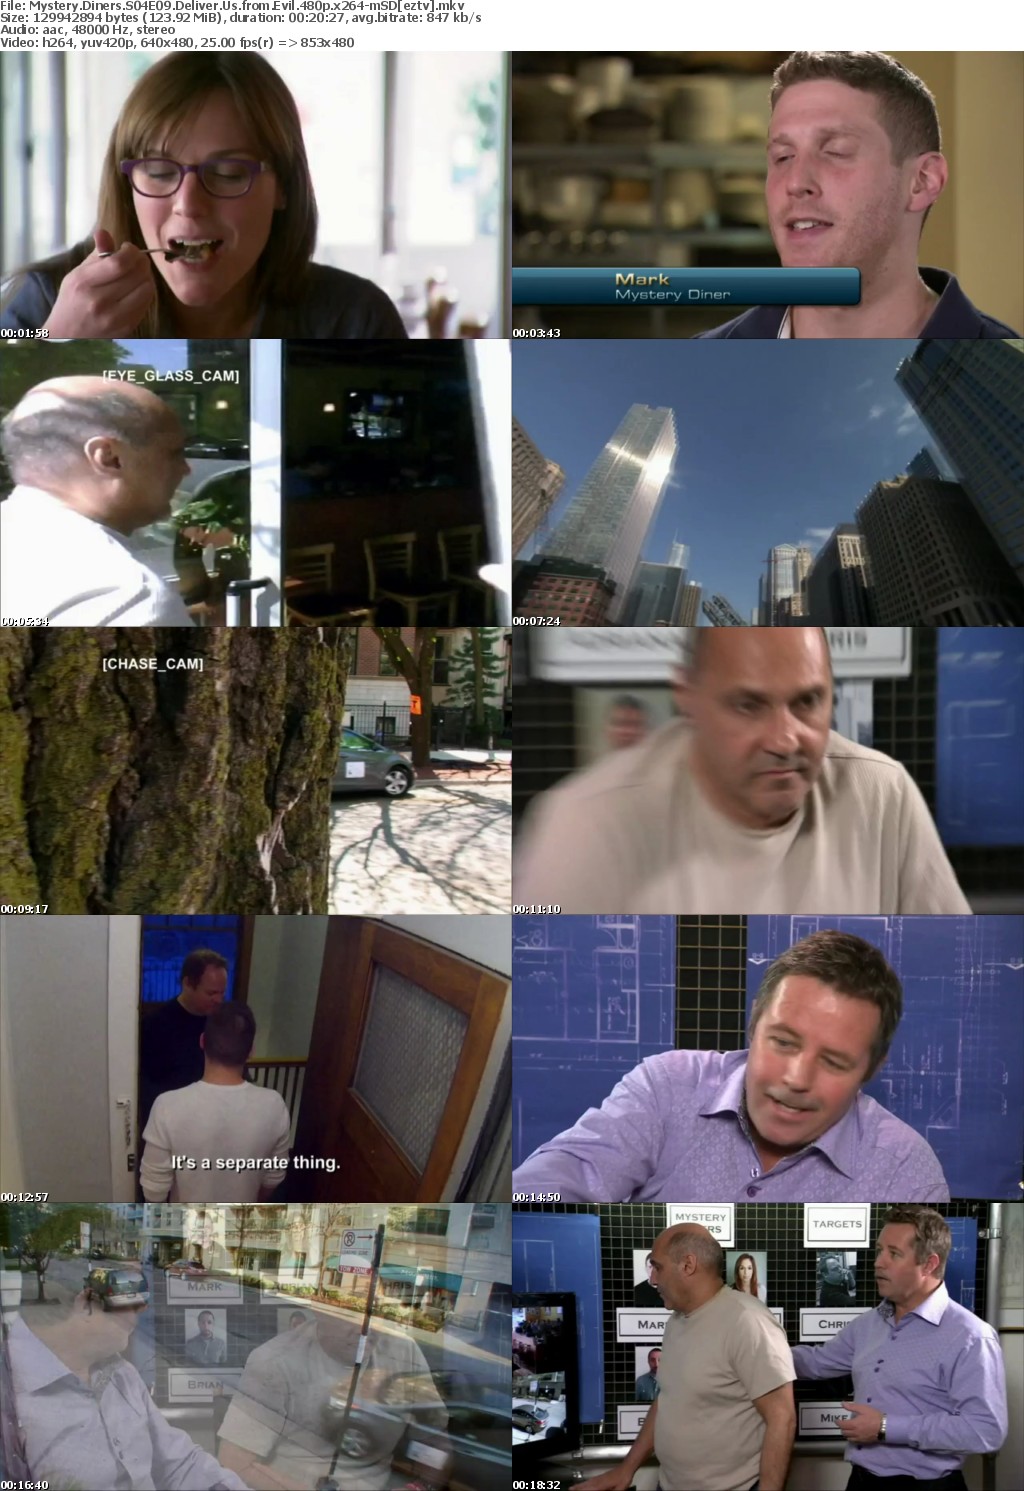 Mystery Diners S04E09 Deliver Us from Evil 480p x264-mSD